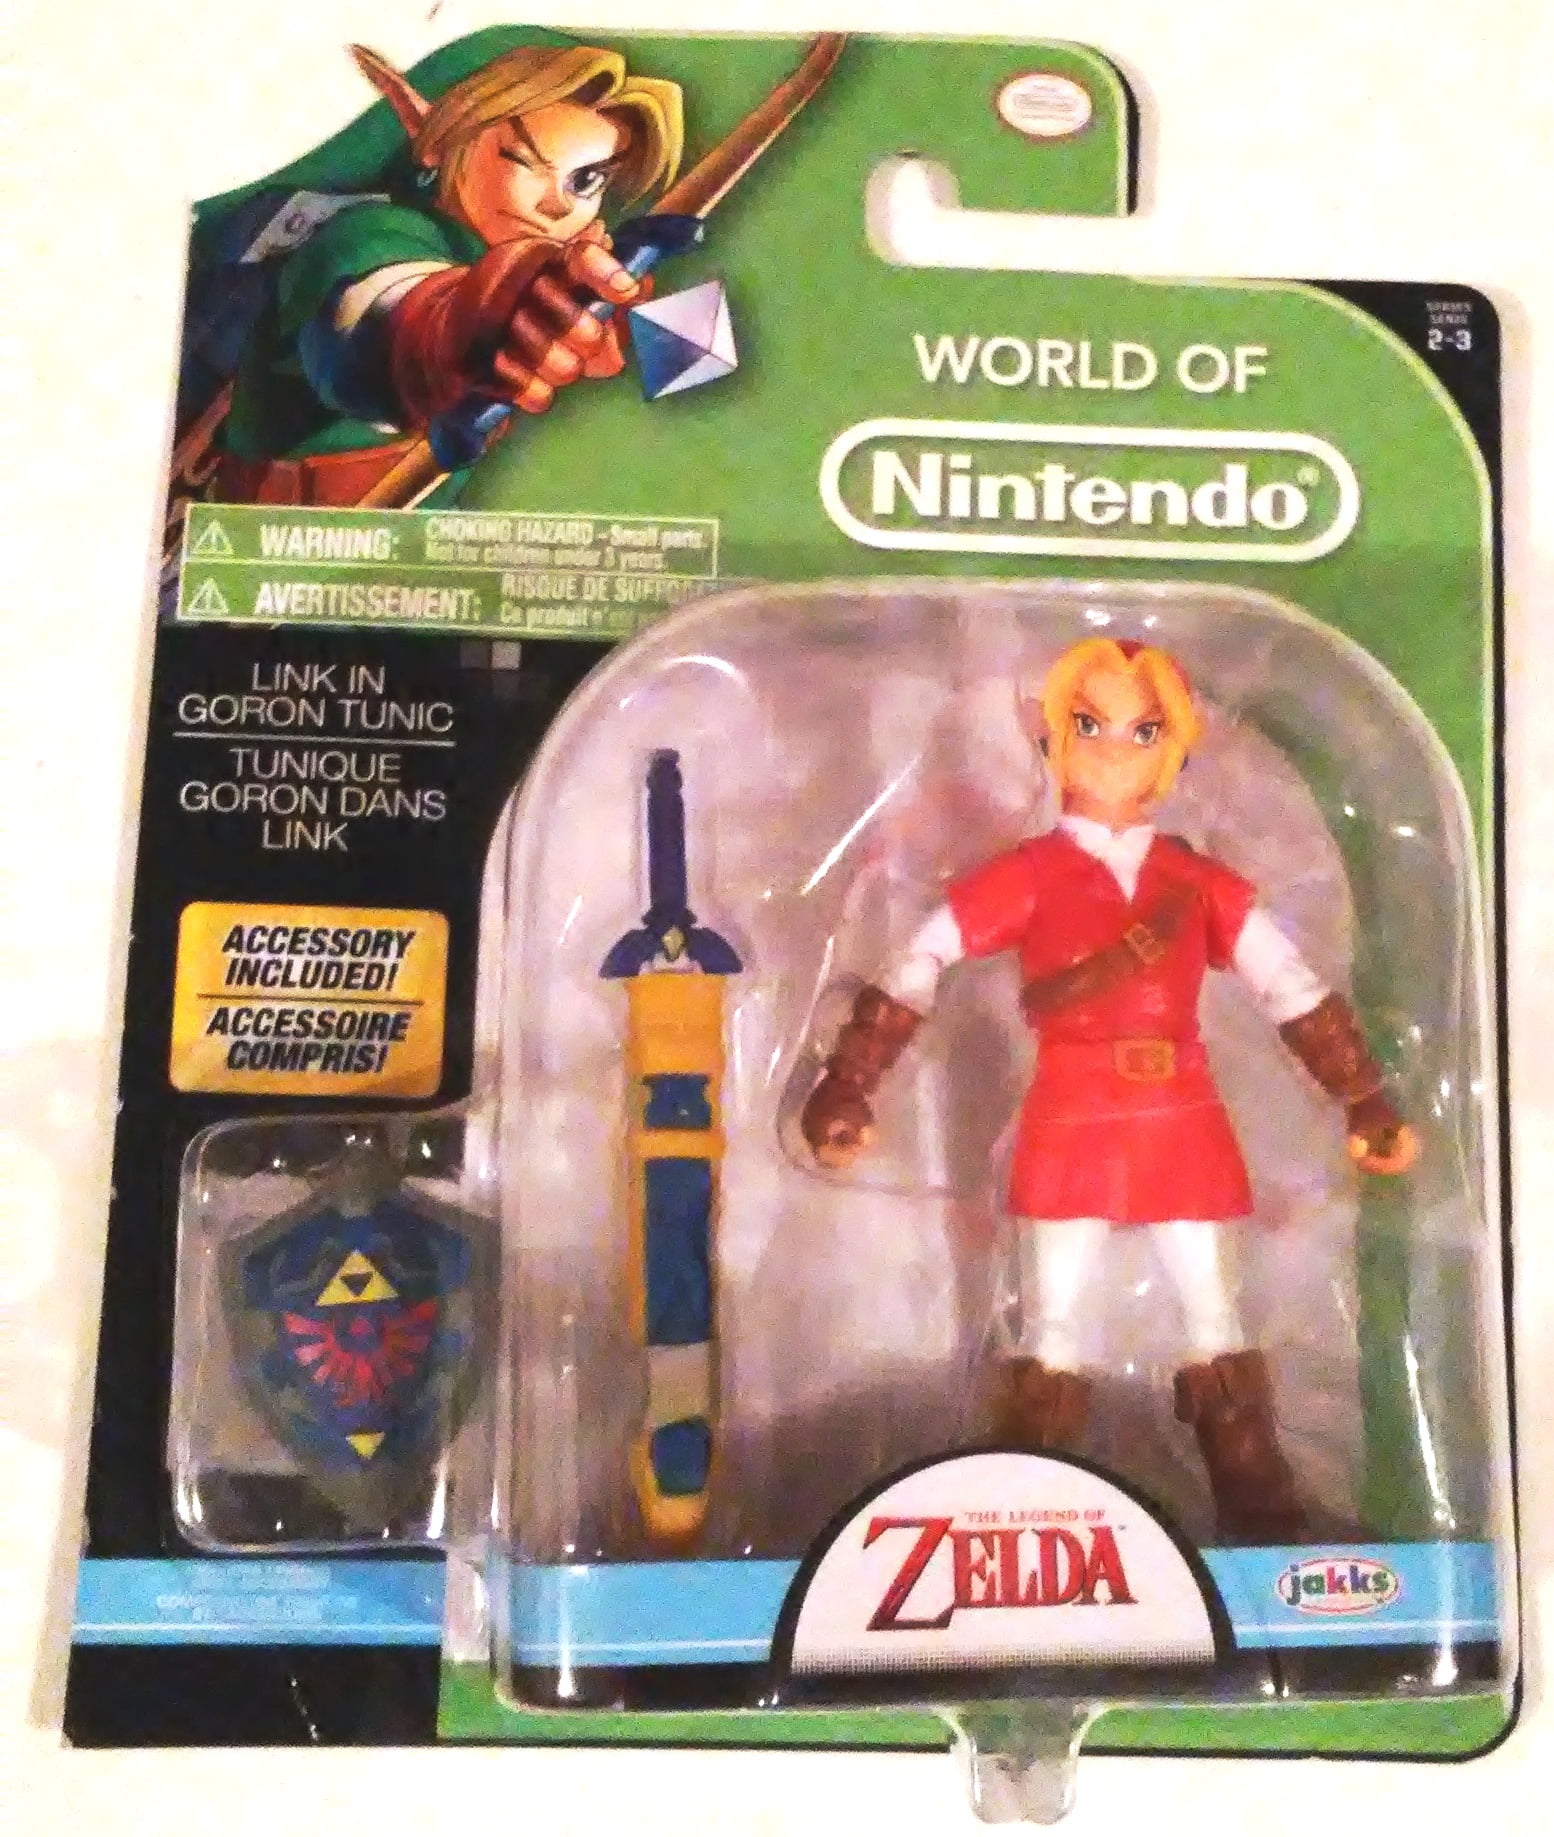 Ocarina of Time Model Kit - The Legend of Collections: Linksliltri4ce's  Zelda Collection